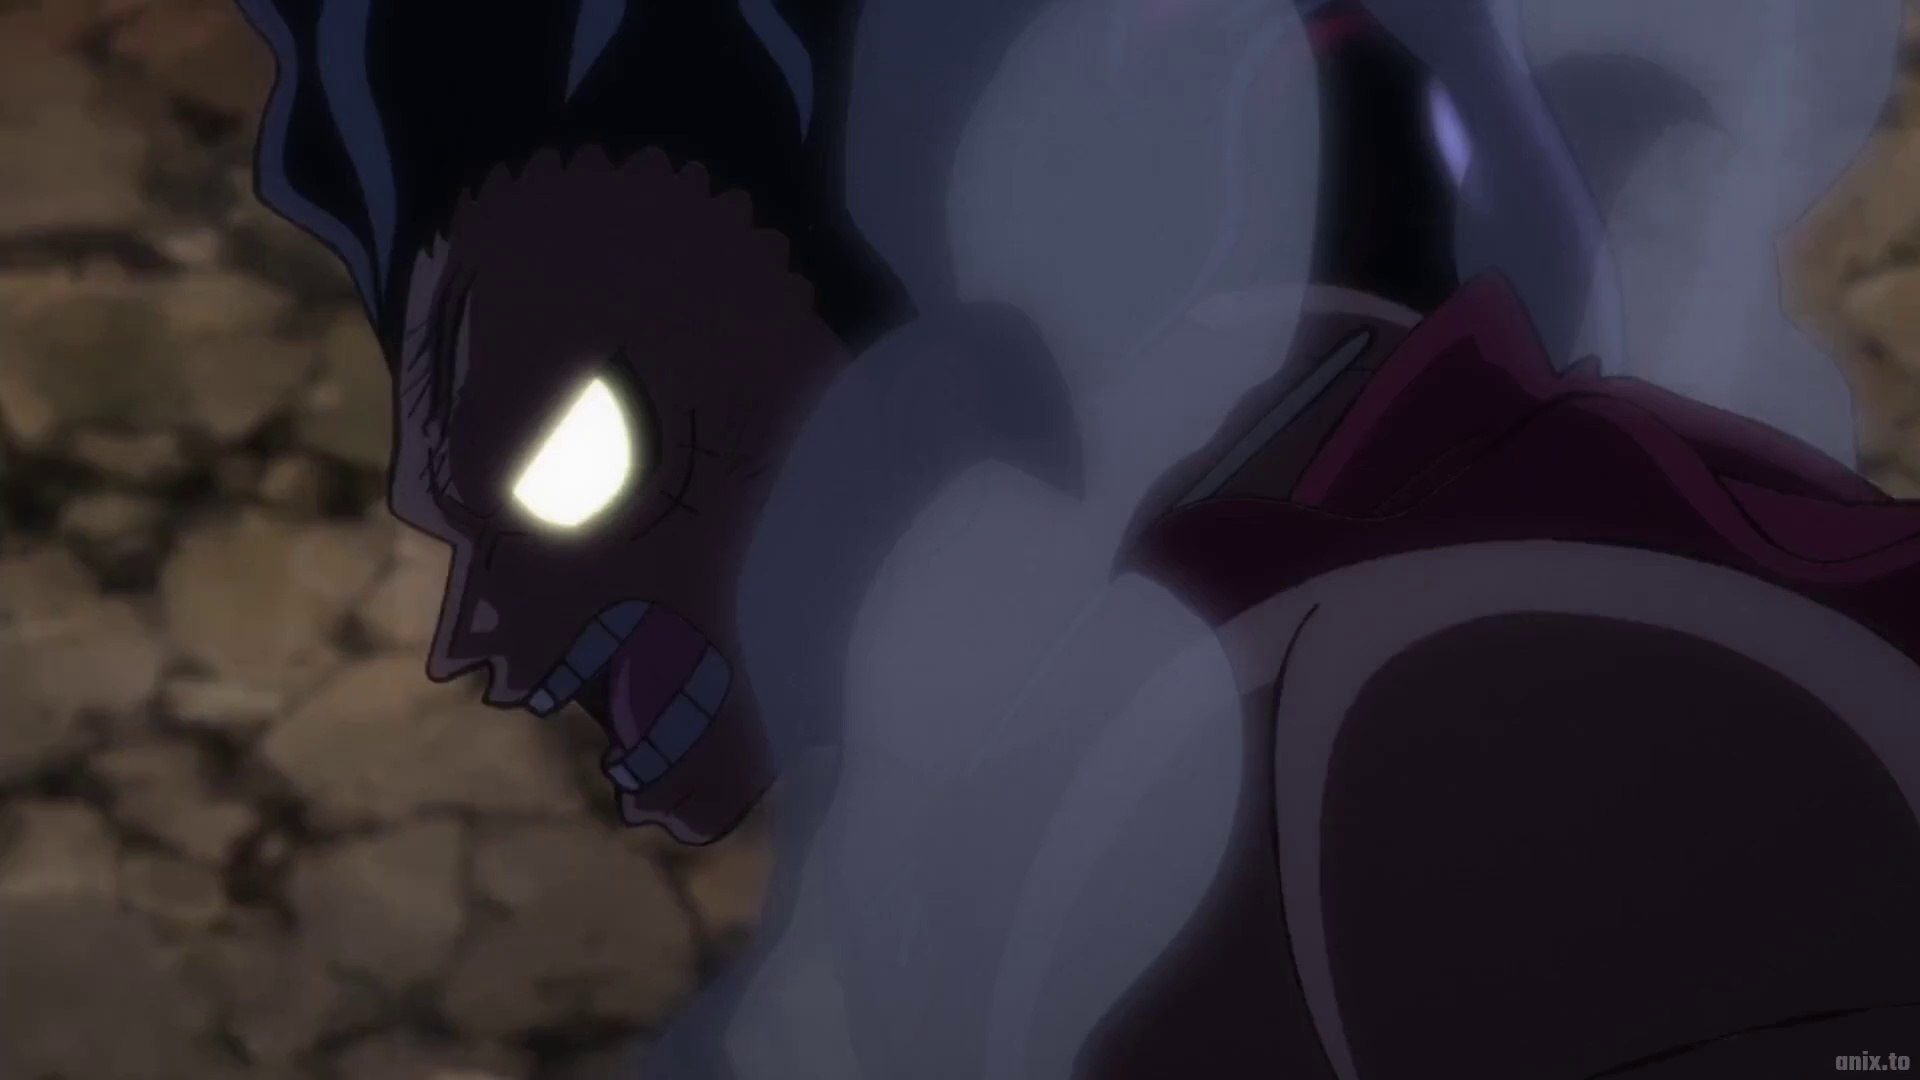 LUFFY's BAKA SONG FROM SKY ISLAND, EPISODE 169